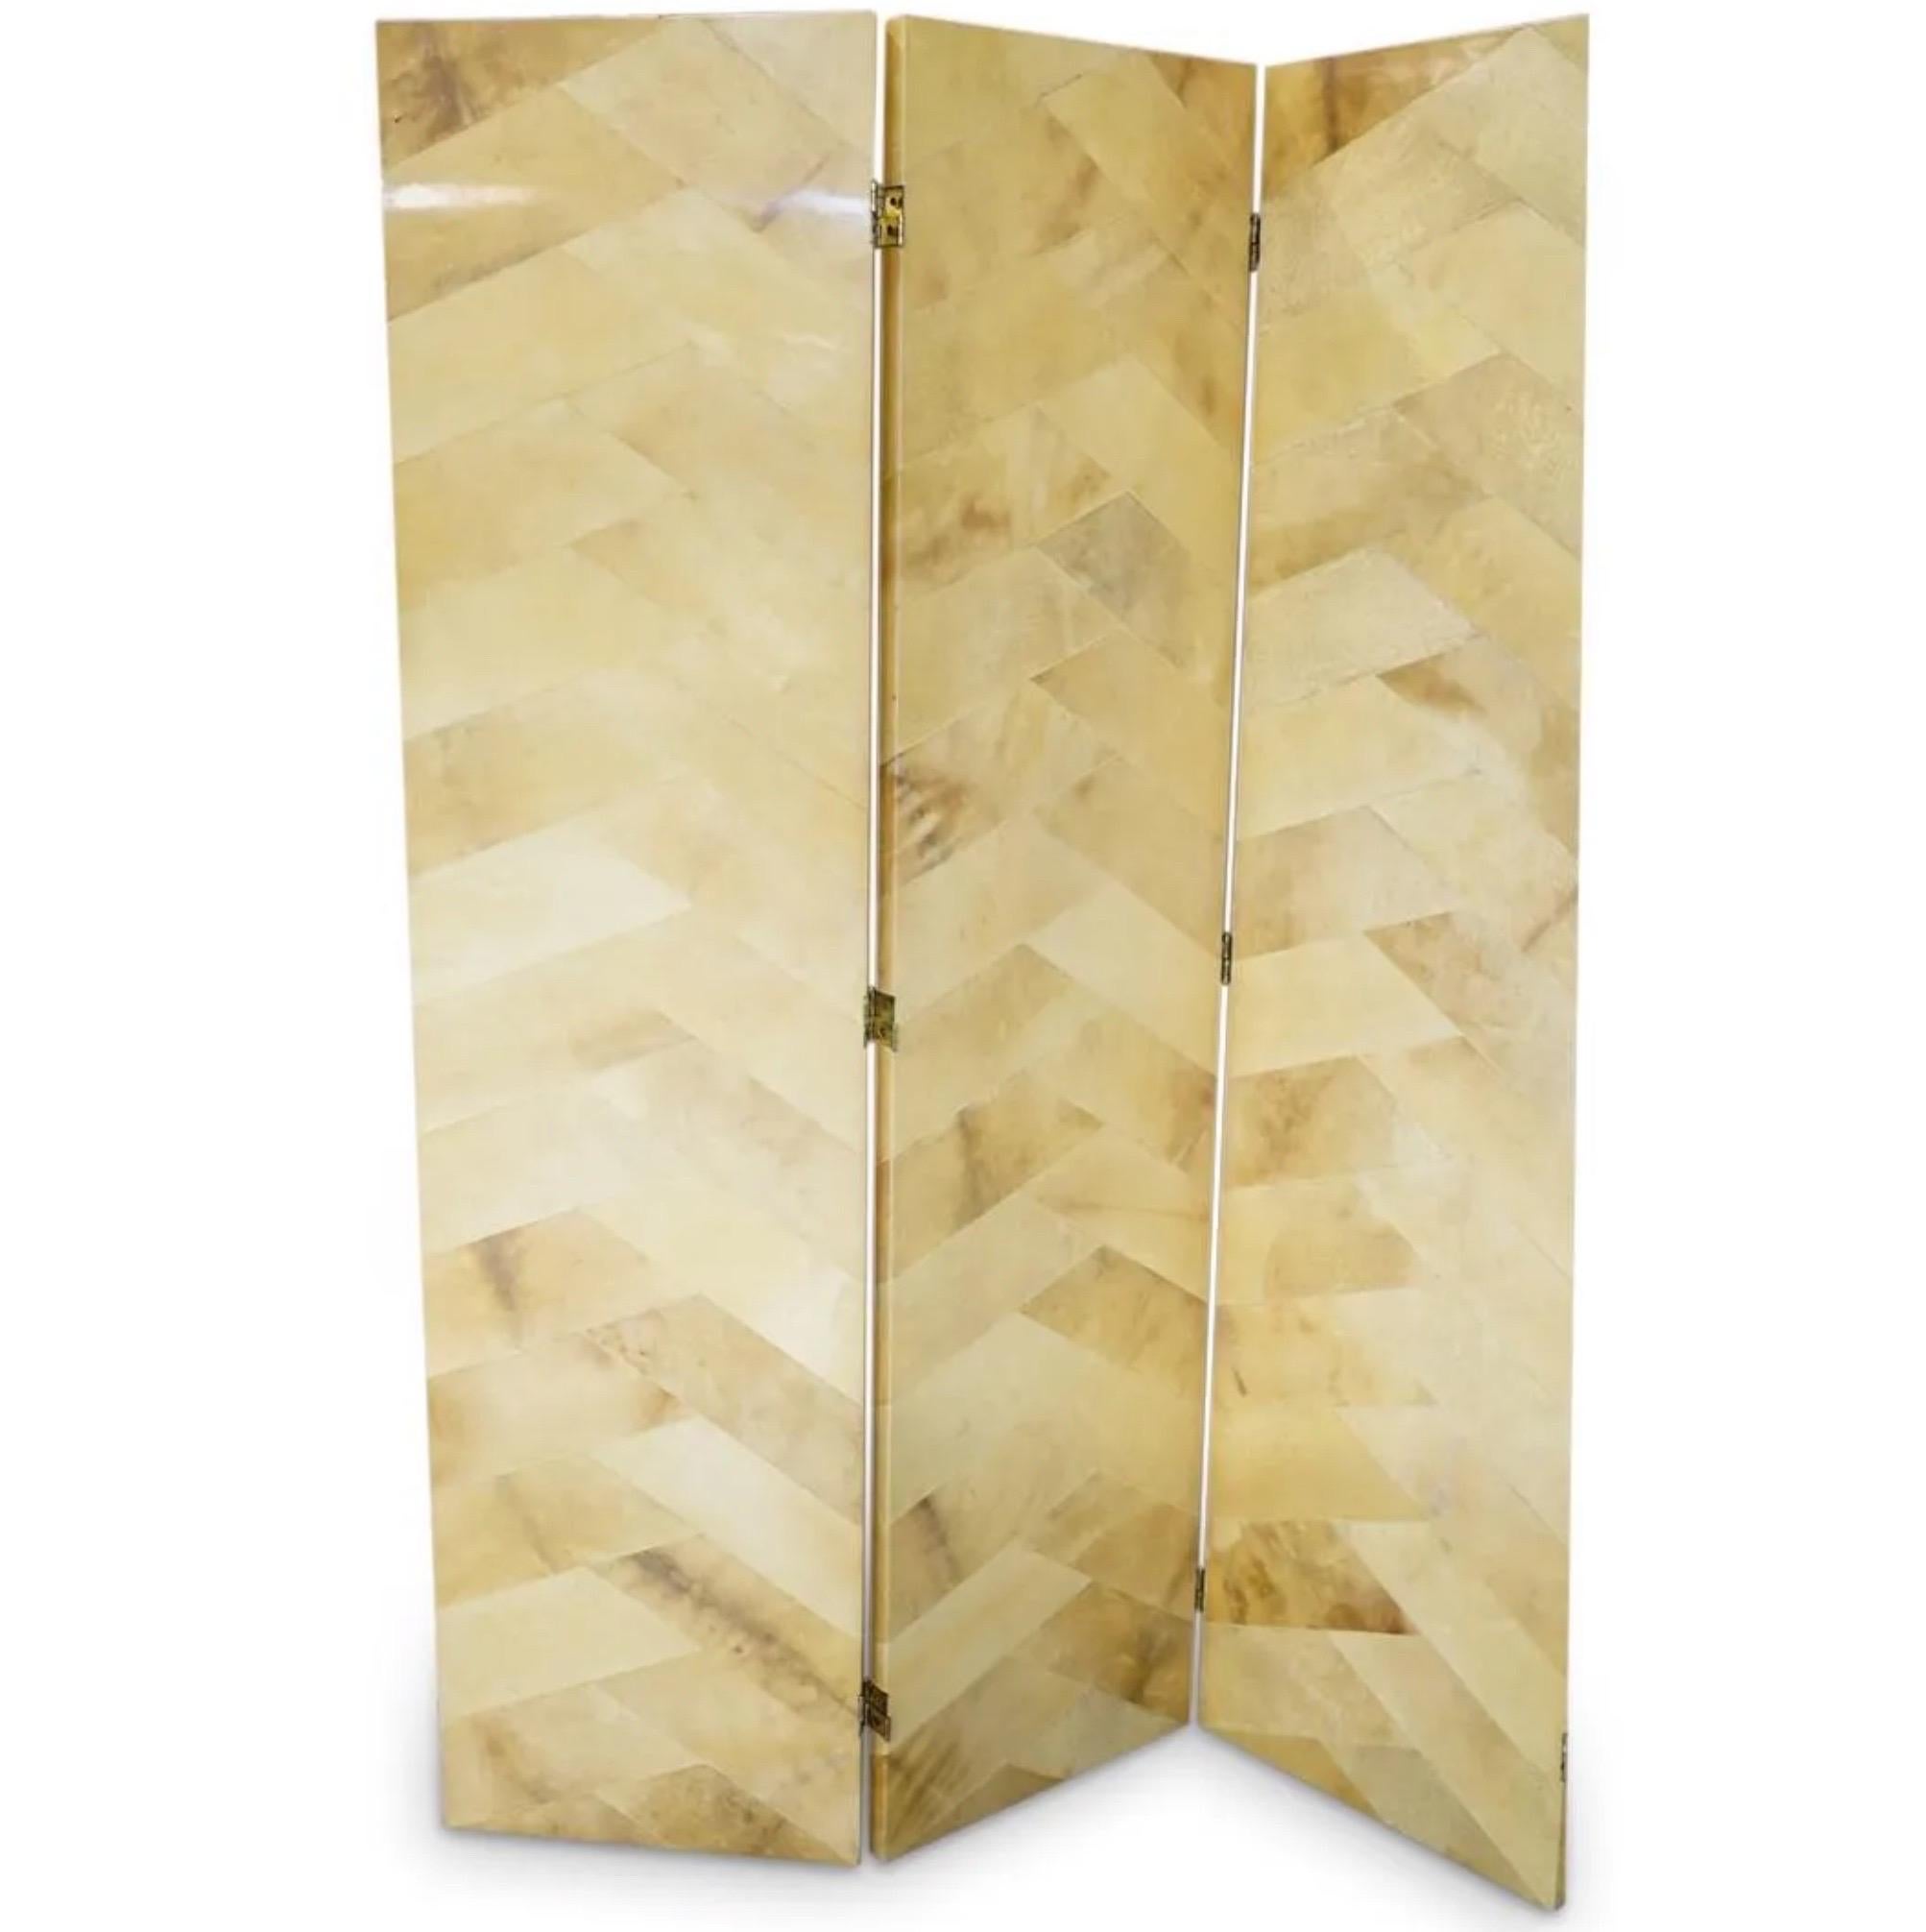 Ron Seff goatskin lacquered screen or room divider with four hinged panels. 
Measures : Each panel is 72 inches High and 18 inches wide.